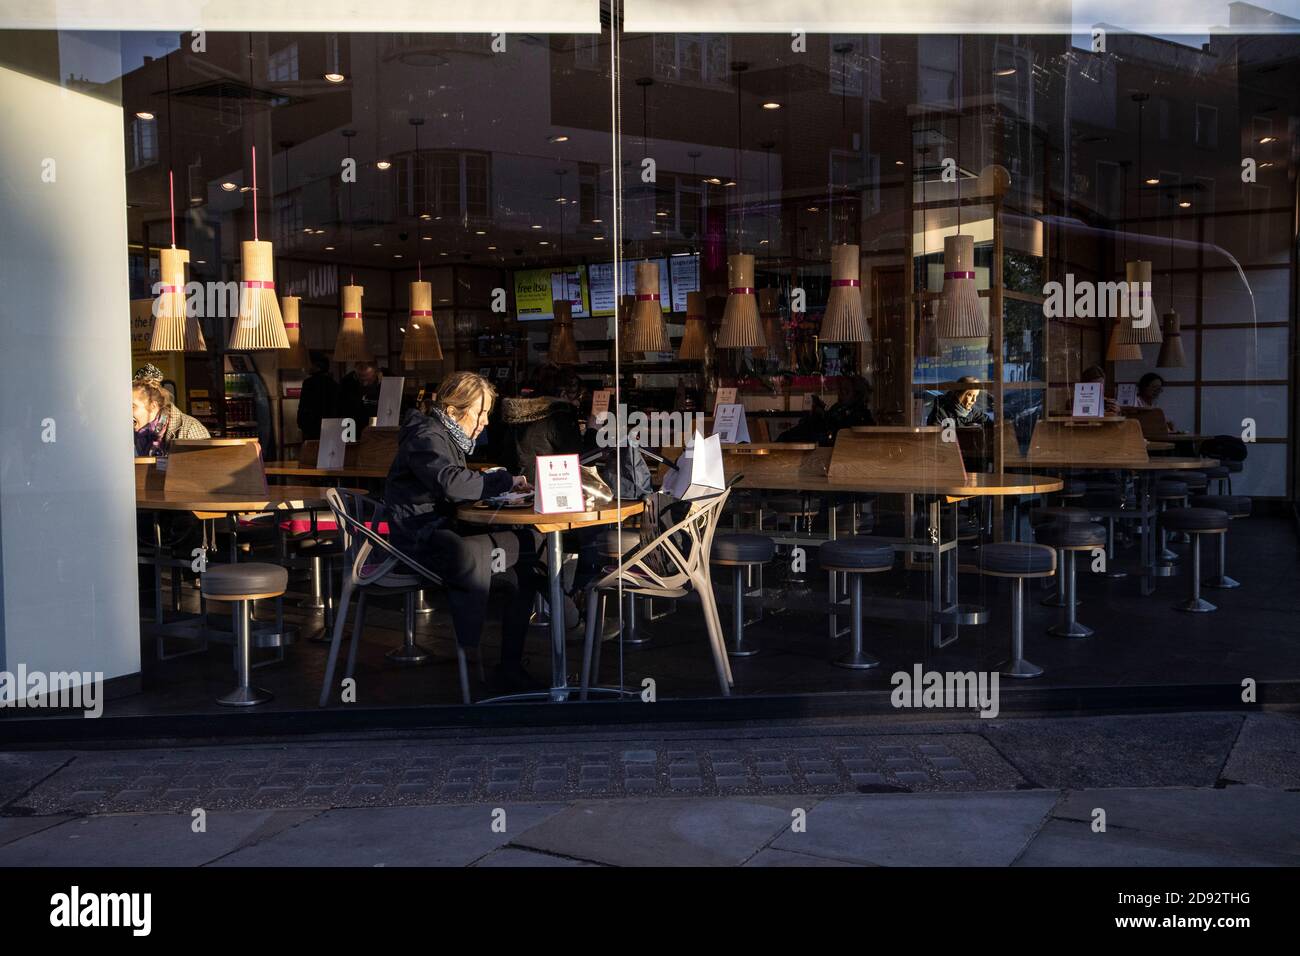 A woman eats alone in an ITSU restaurant on one of the last days before the latest 'Long Lockdown' restrictions are enforced closing restaurants, UK. Stock Photo